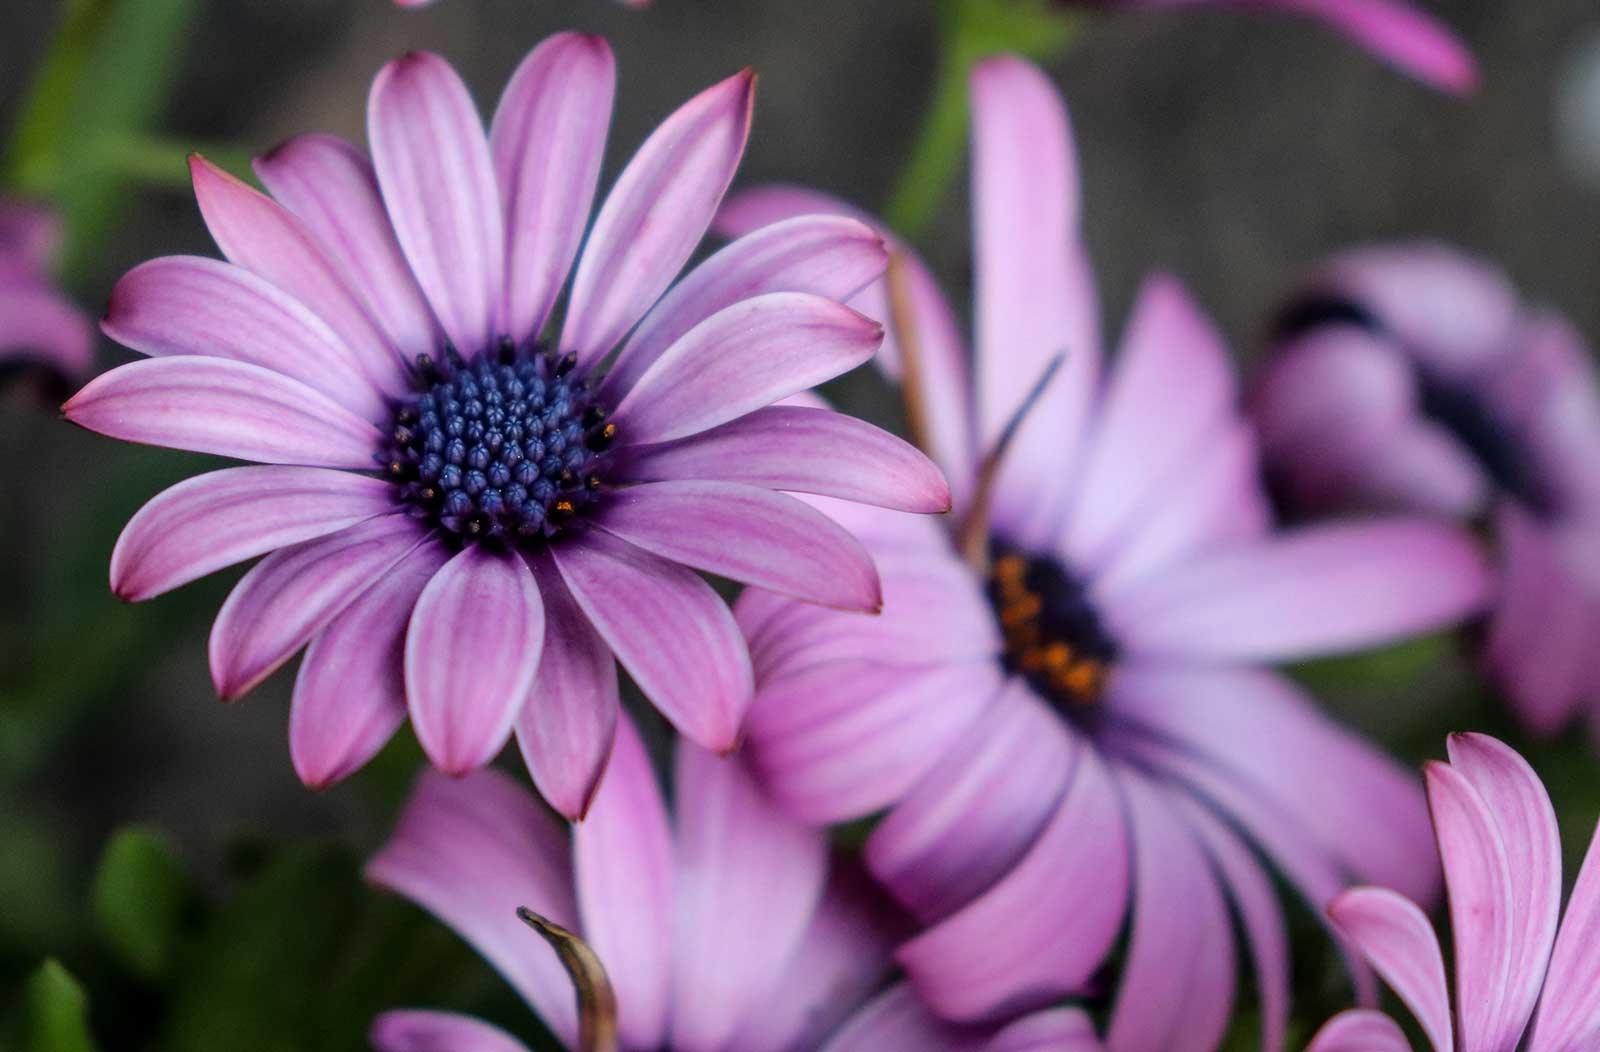 African daisies (Osteospermum spp.) look a lot like common daisies, with petals radiating around a center disk. They are even members of the Asteraceae family, along with shasta daisies and zinnias.